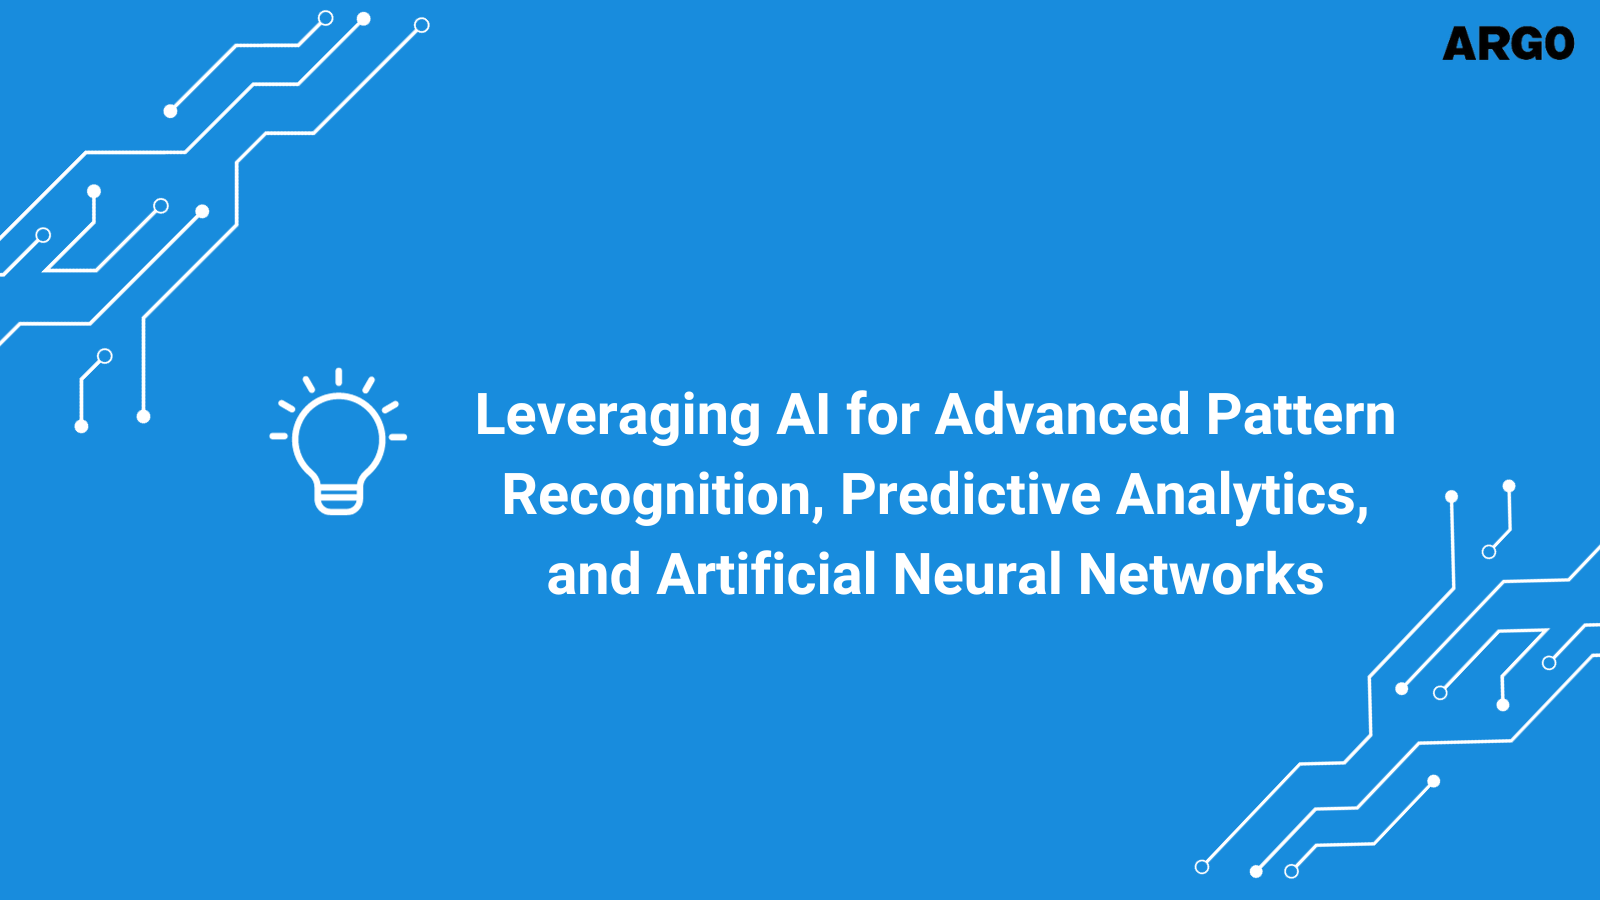 Leveraging AI for Advanced Pattern Recognition, Predictive Analytics, and Artificial Neural Networks